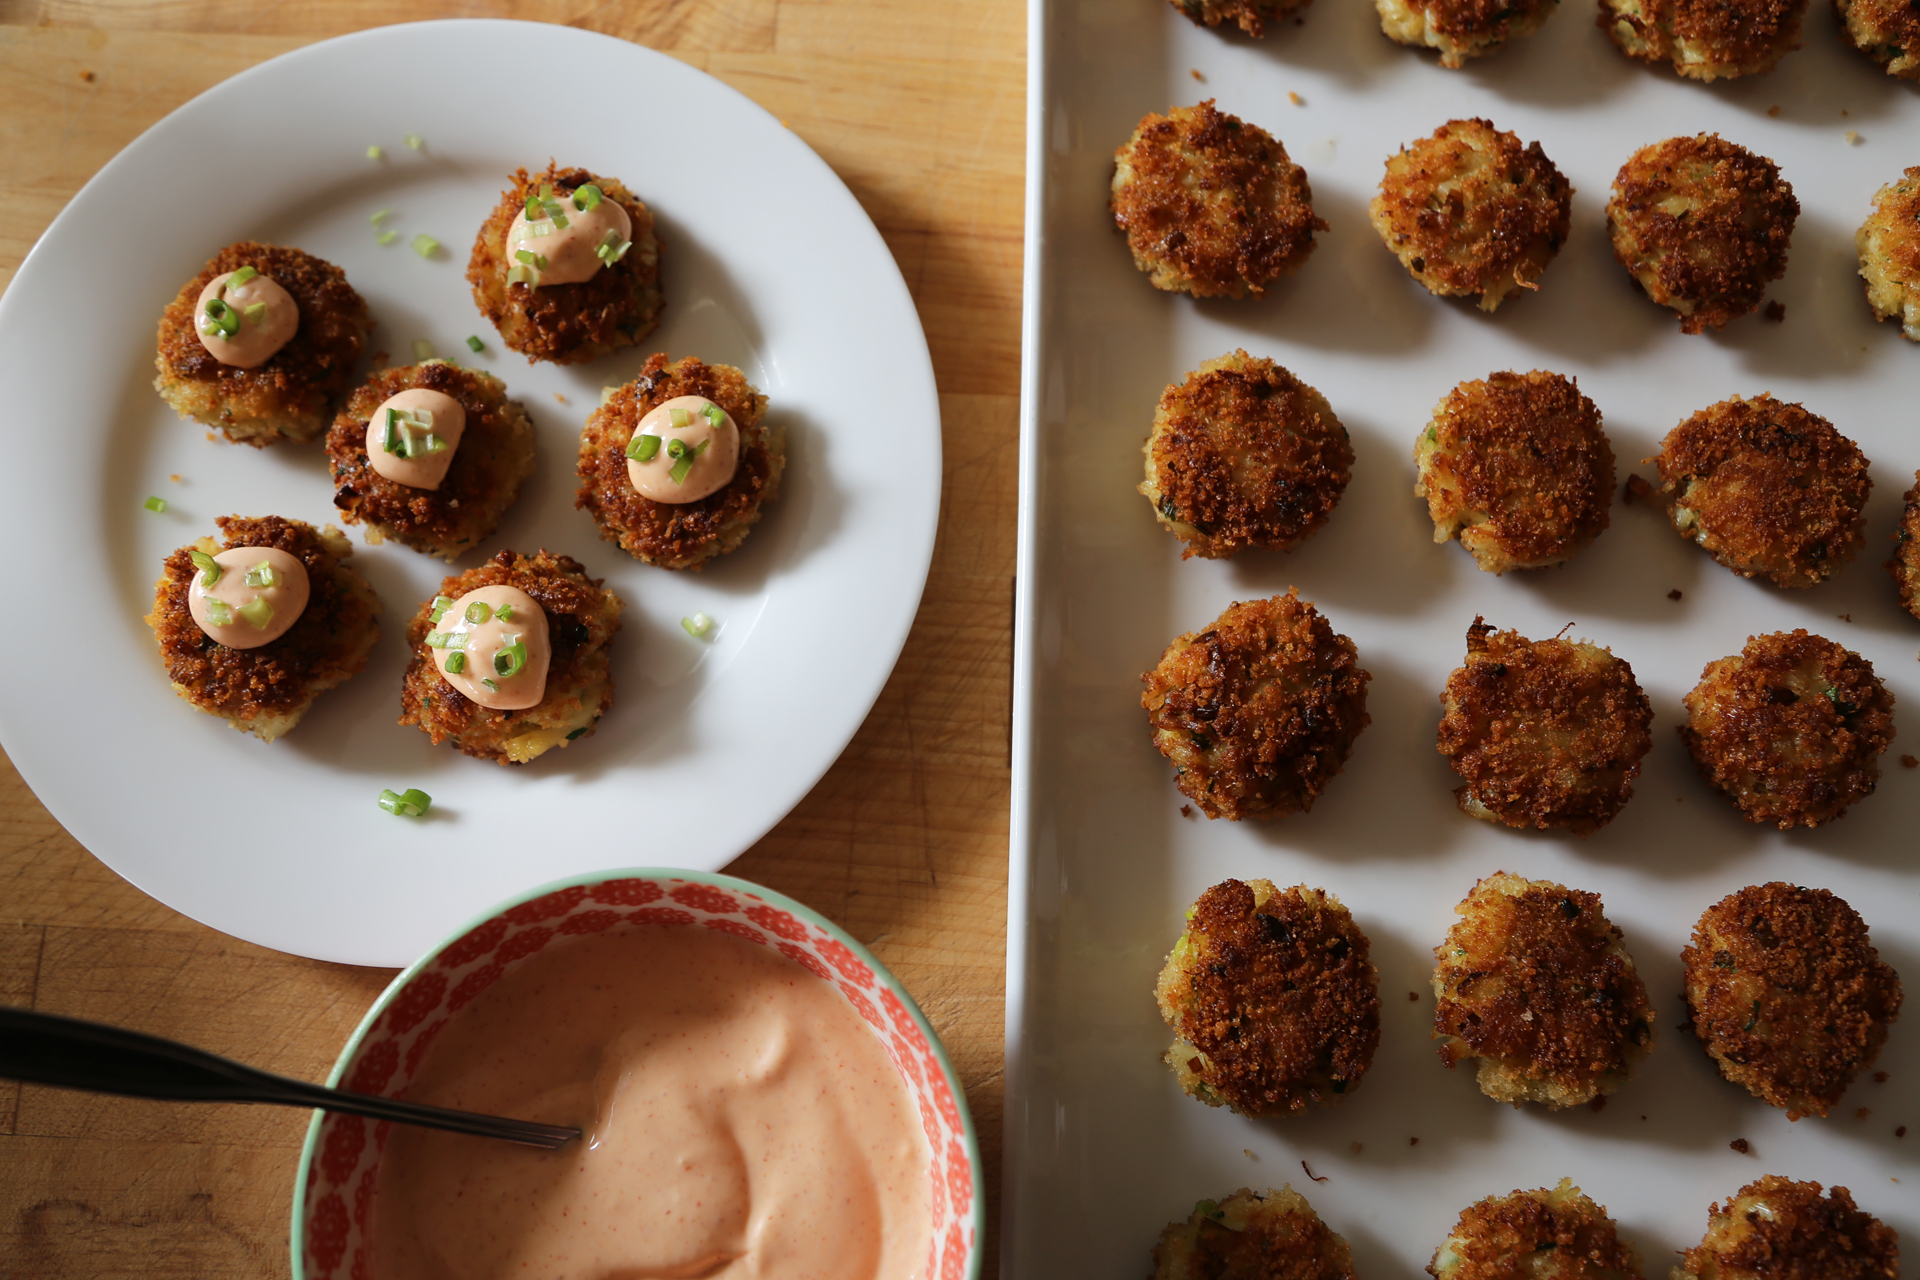 Serve at once with the spicy mayo alongside, or, for passed hors d’oeuvres, place the crab cakes on a platter, top with a little dollop of mayo and a sprinkle of green onion.